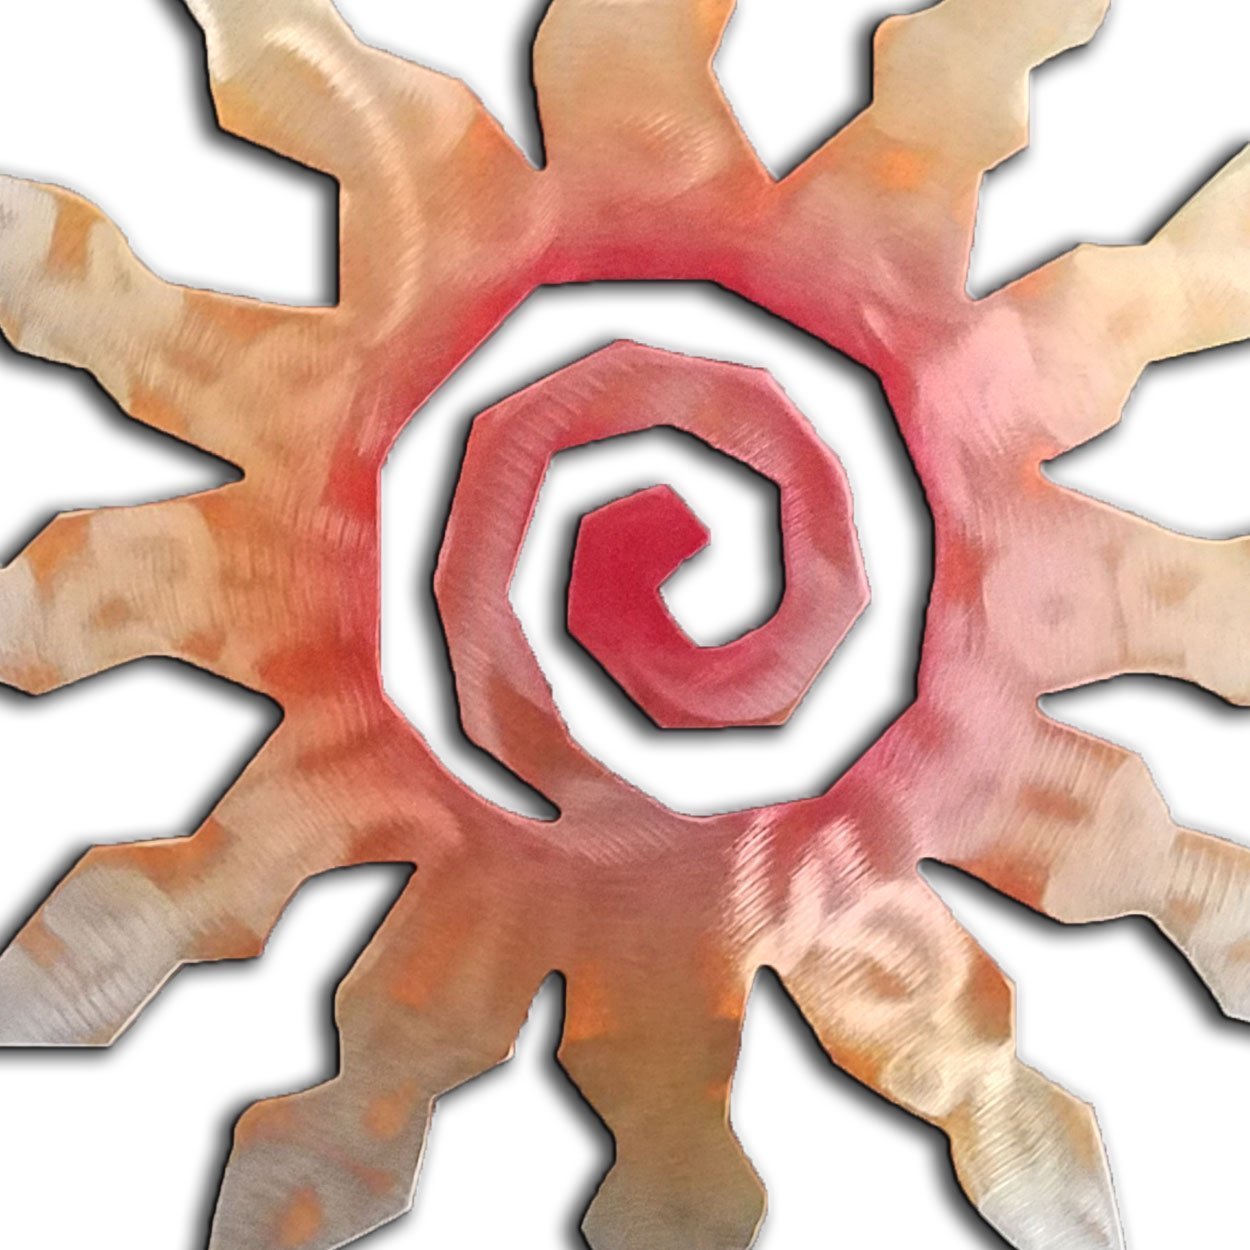 165004 - 30-inch extra large 12-Point Sunburst 3D Metal Wall Art in a vibrant sunset swirl finish